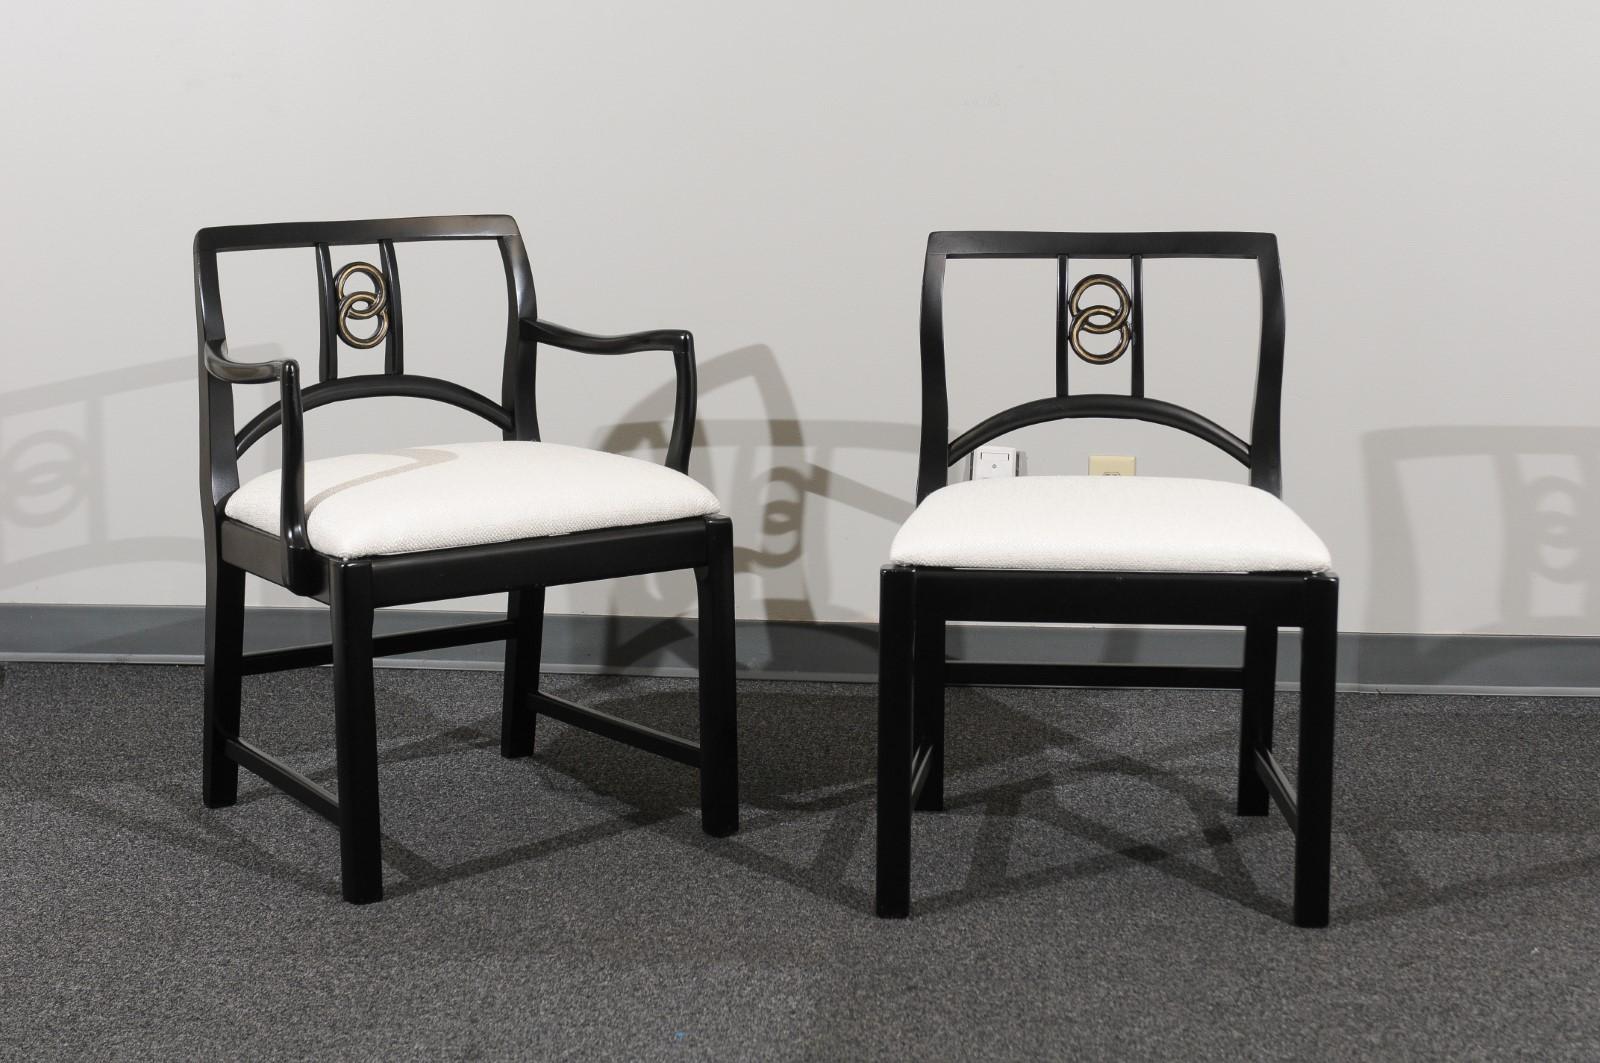 This magnificent set of dining chairs is shipped as professionally photographed and described in the listing narrative: Meticulously professionally restored, newly upholstered and completely installation ready. Expert custom upholstery service is